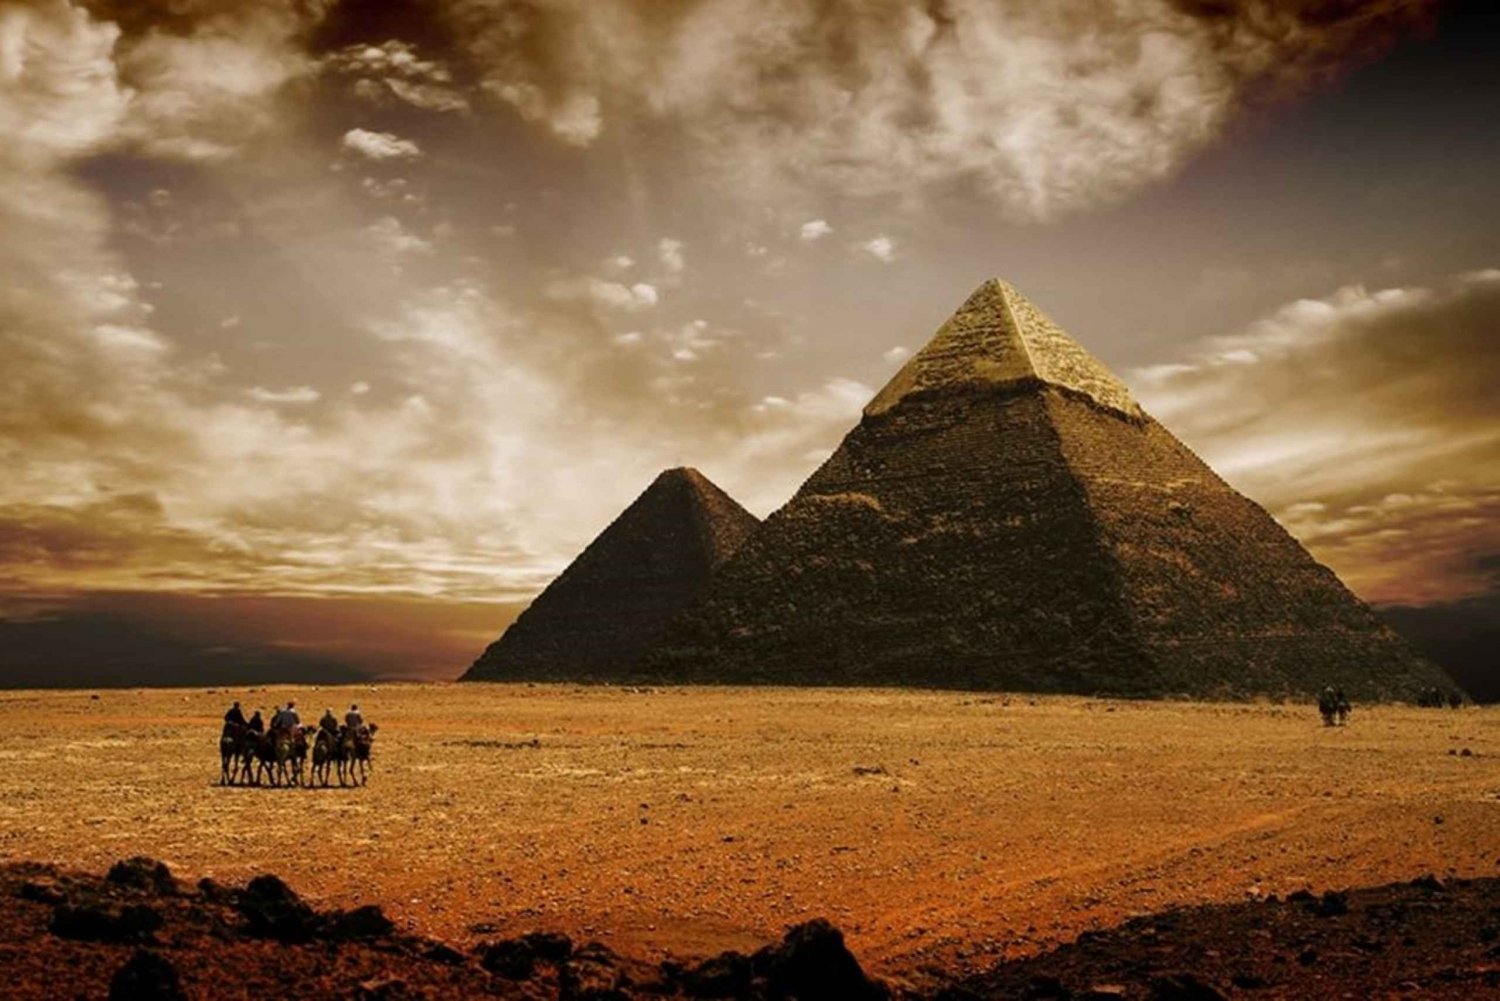 From Hurghada: Cairo & Giza Ancient Egypt Full-Day Trip